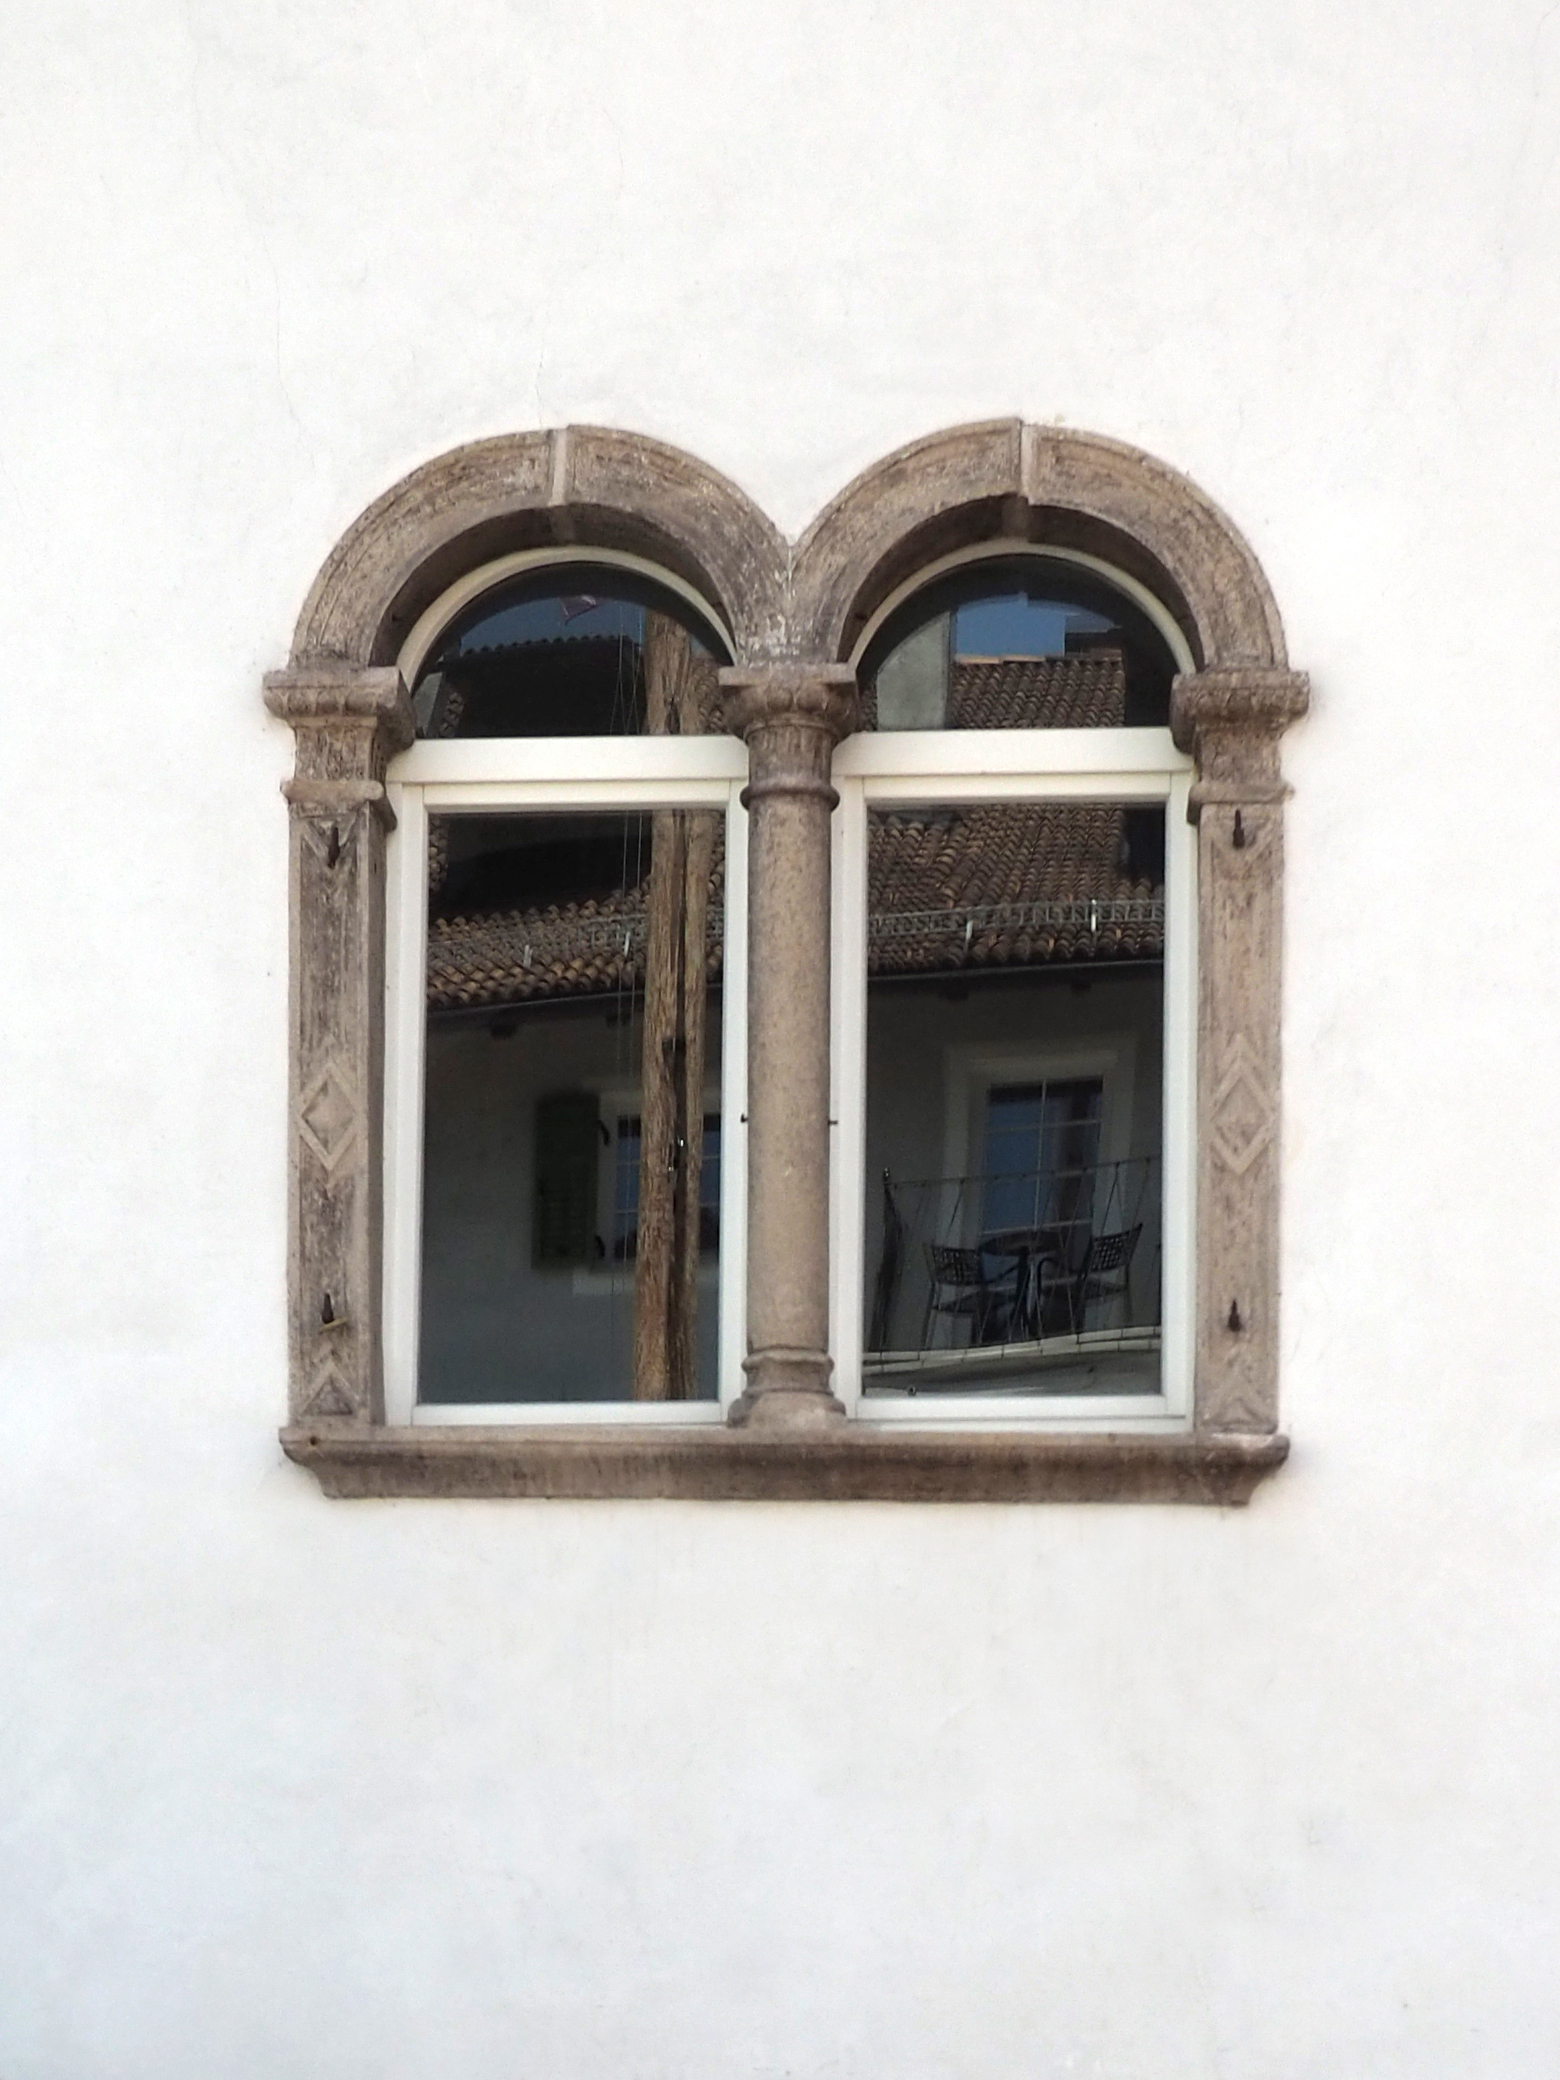 Places to stay in Caldaro - old windows